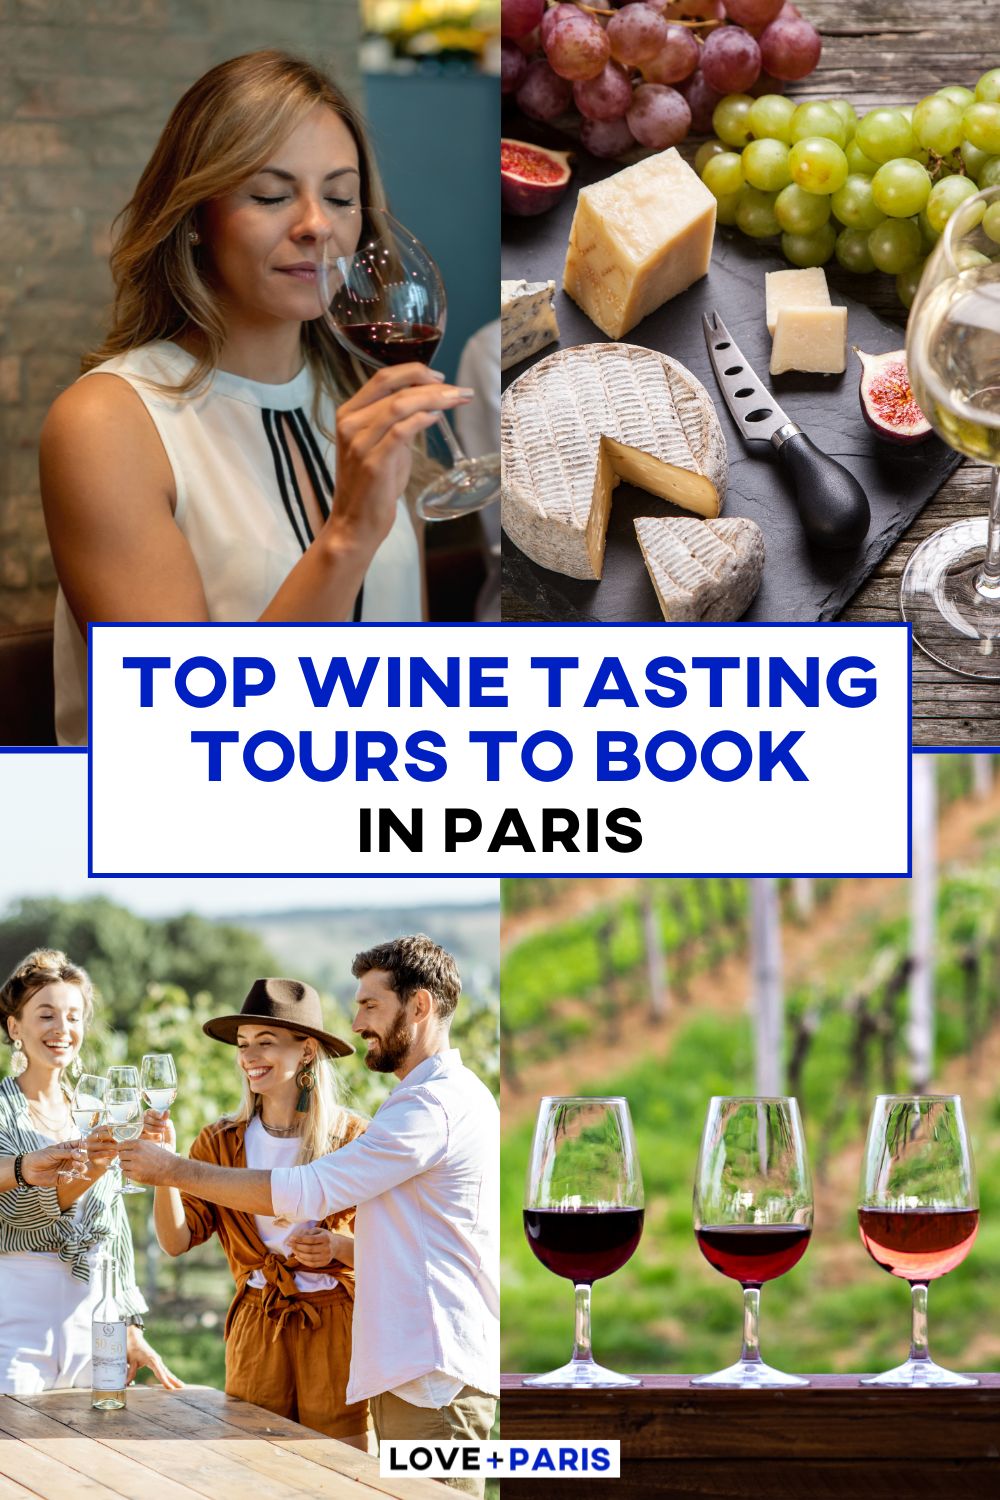 This is a Pinterest image detailing the Top Wine Tasting Tours To Book In Paris.